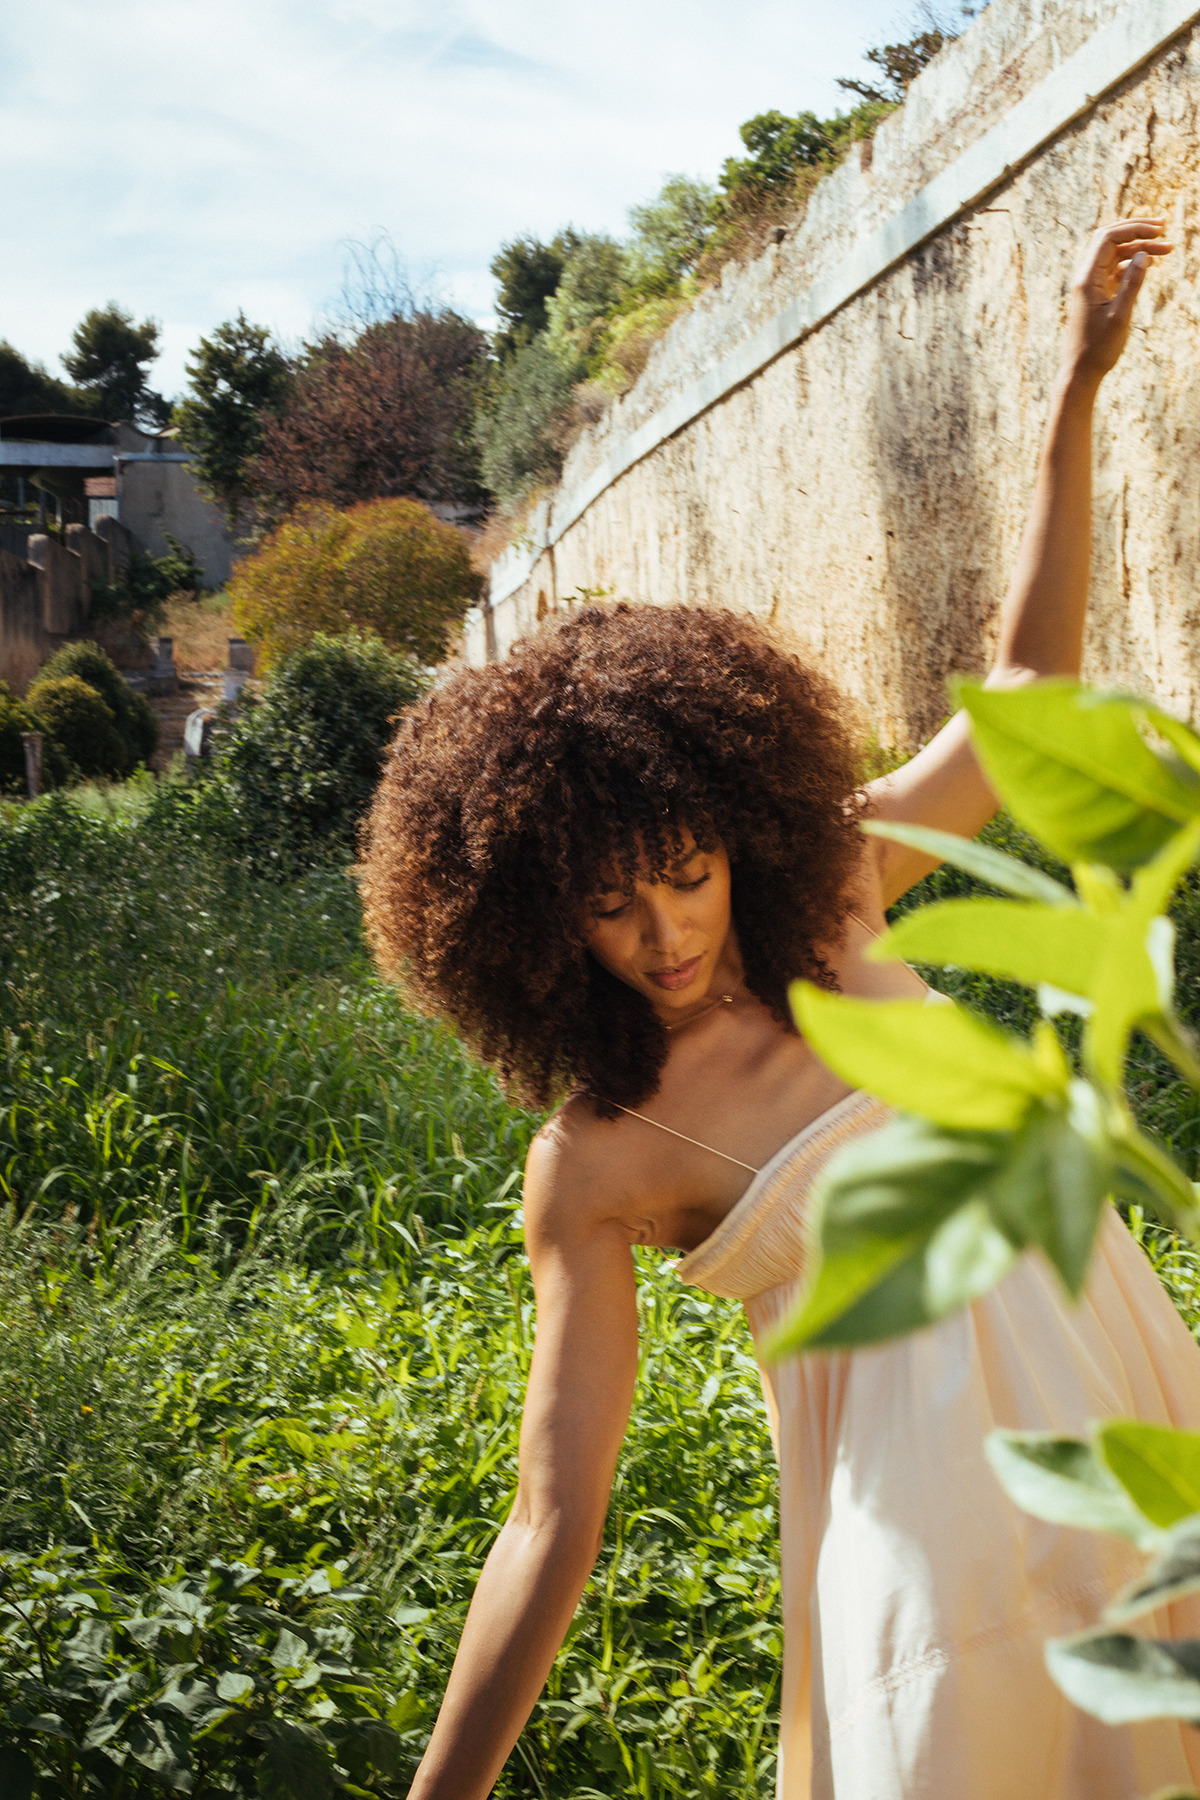 A woman standing in a garden holding onto a wall with one arm and plants around her